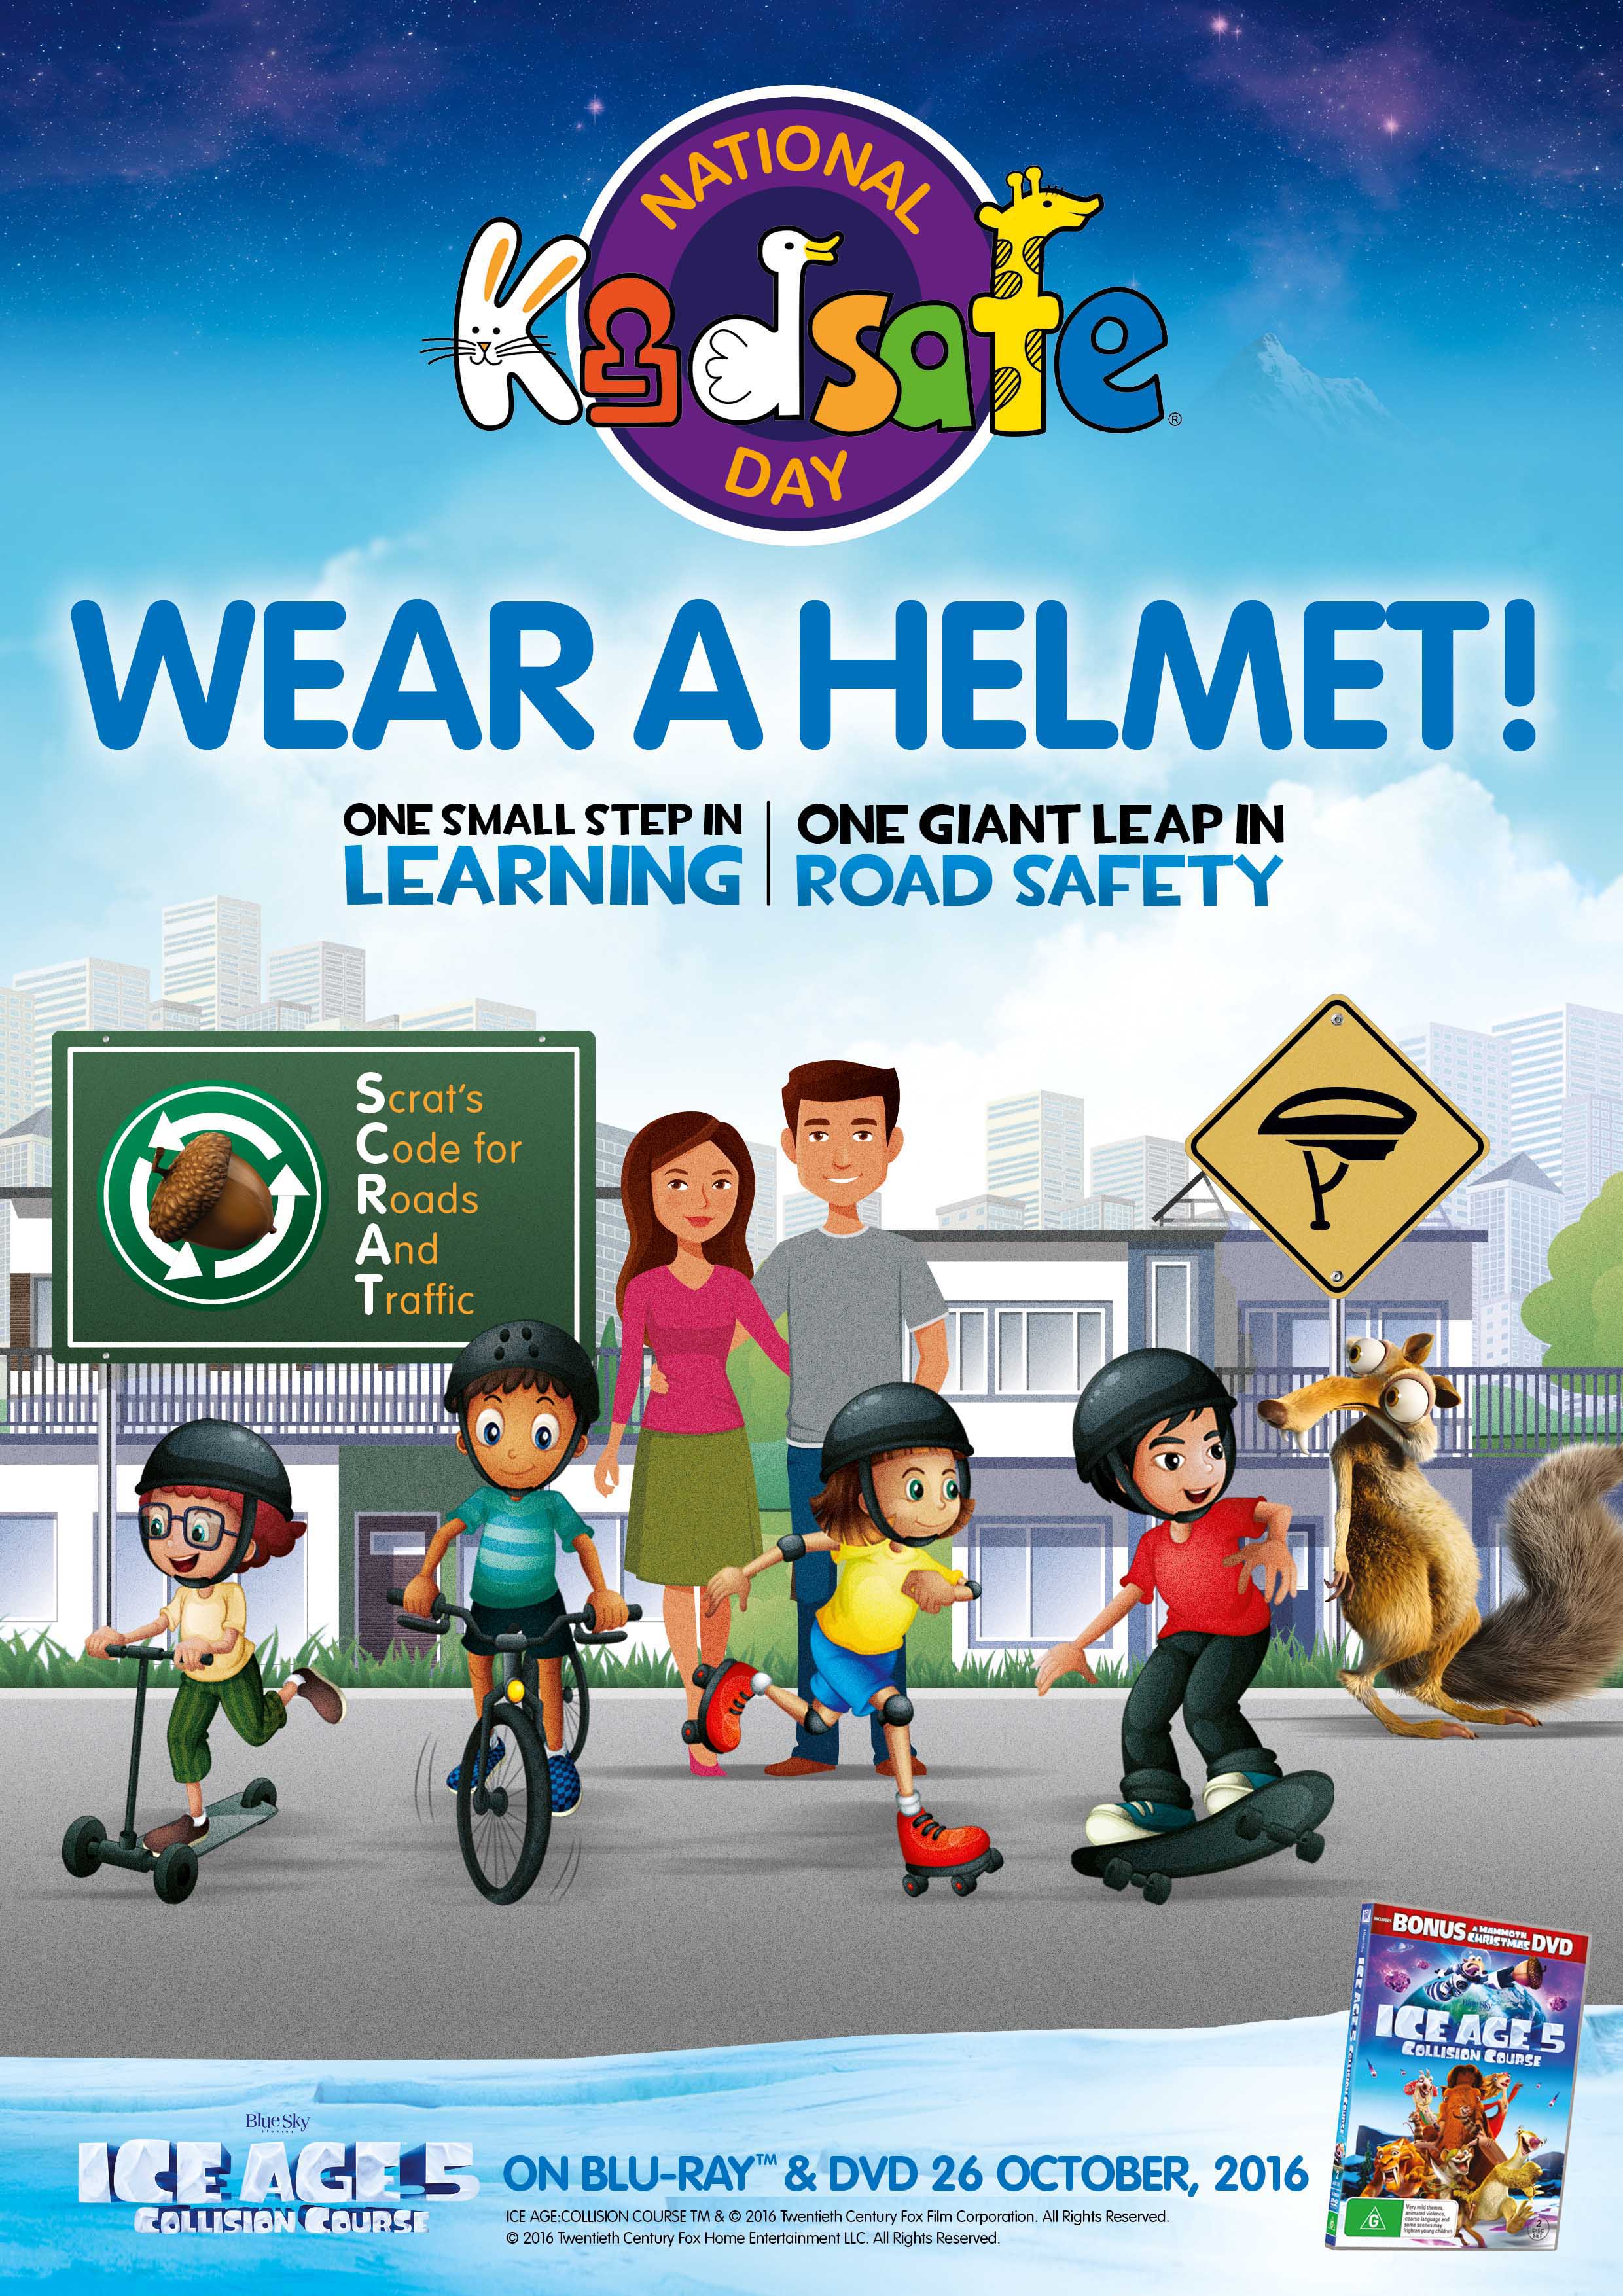 Road Safety Posters Ideas For Kids - HSE Images & Videos Gallery